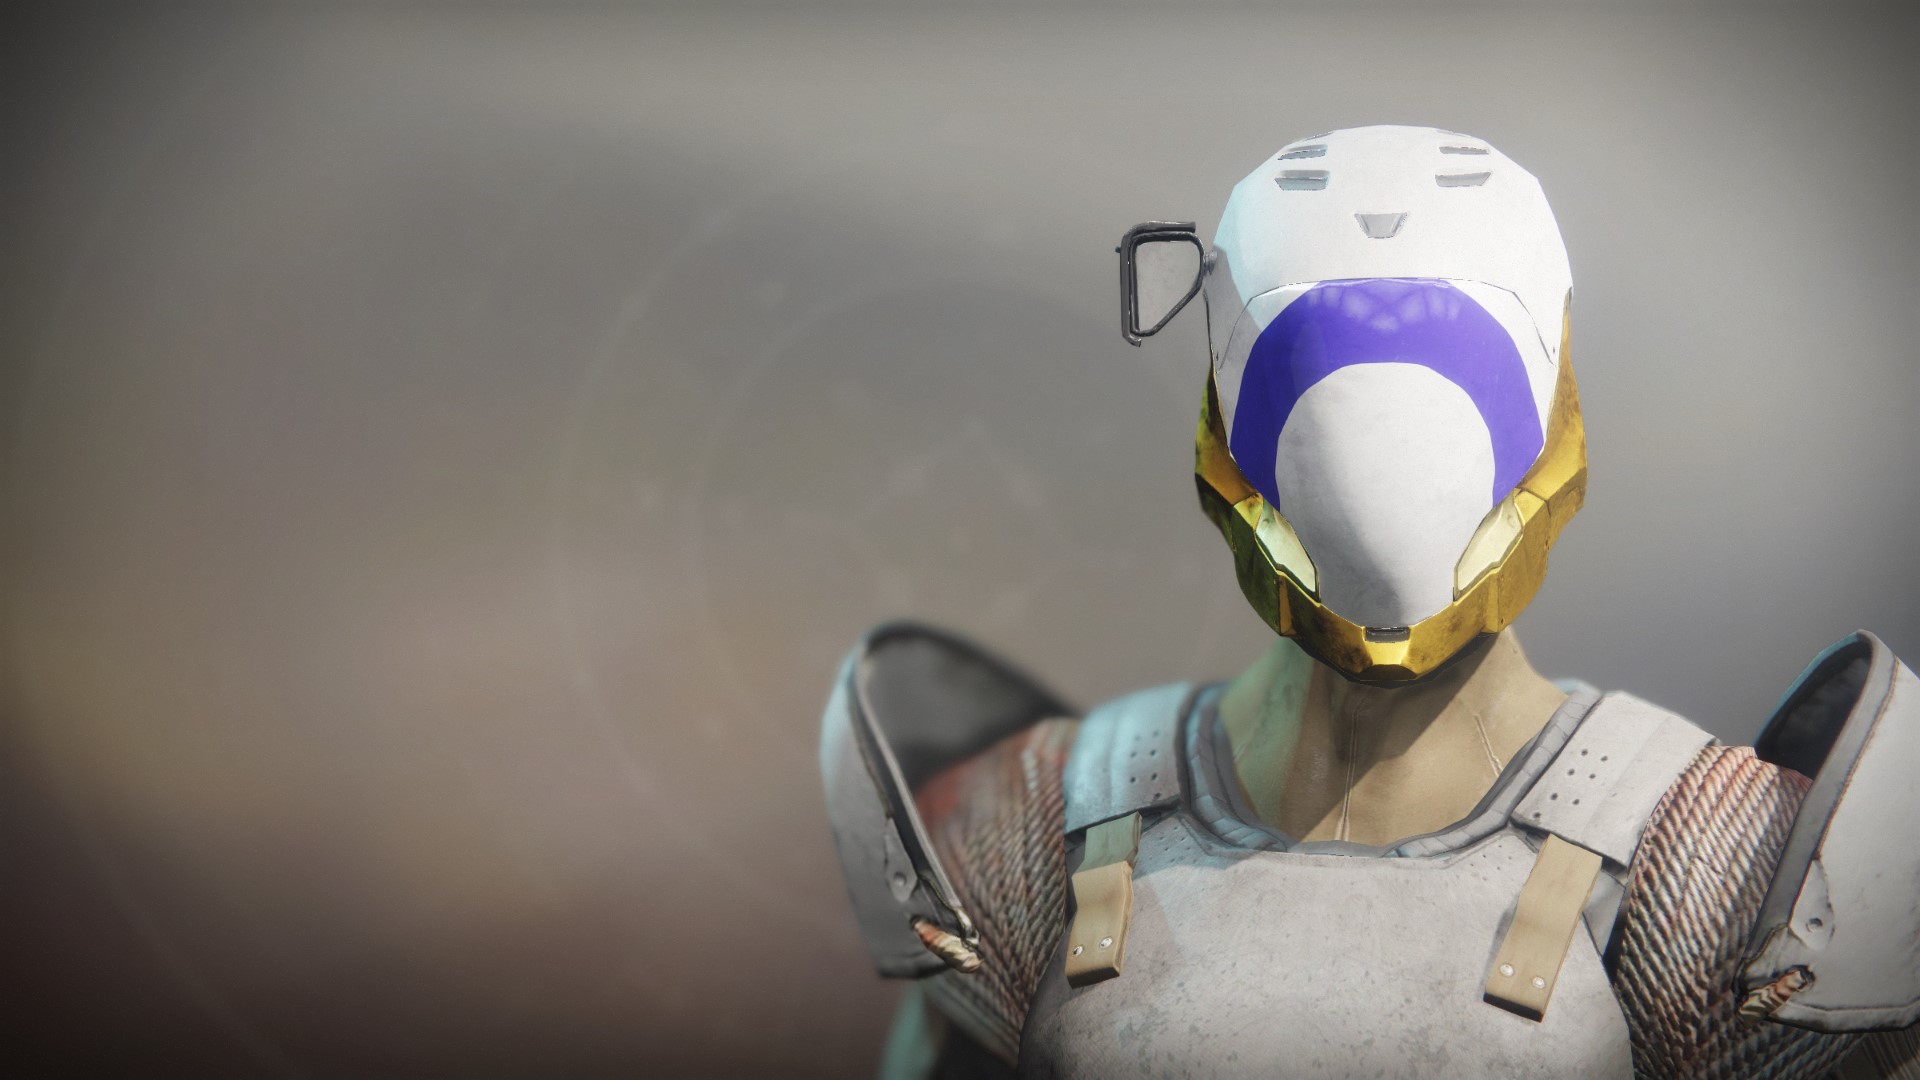 An in-game render of the Superior's Vision Helm.